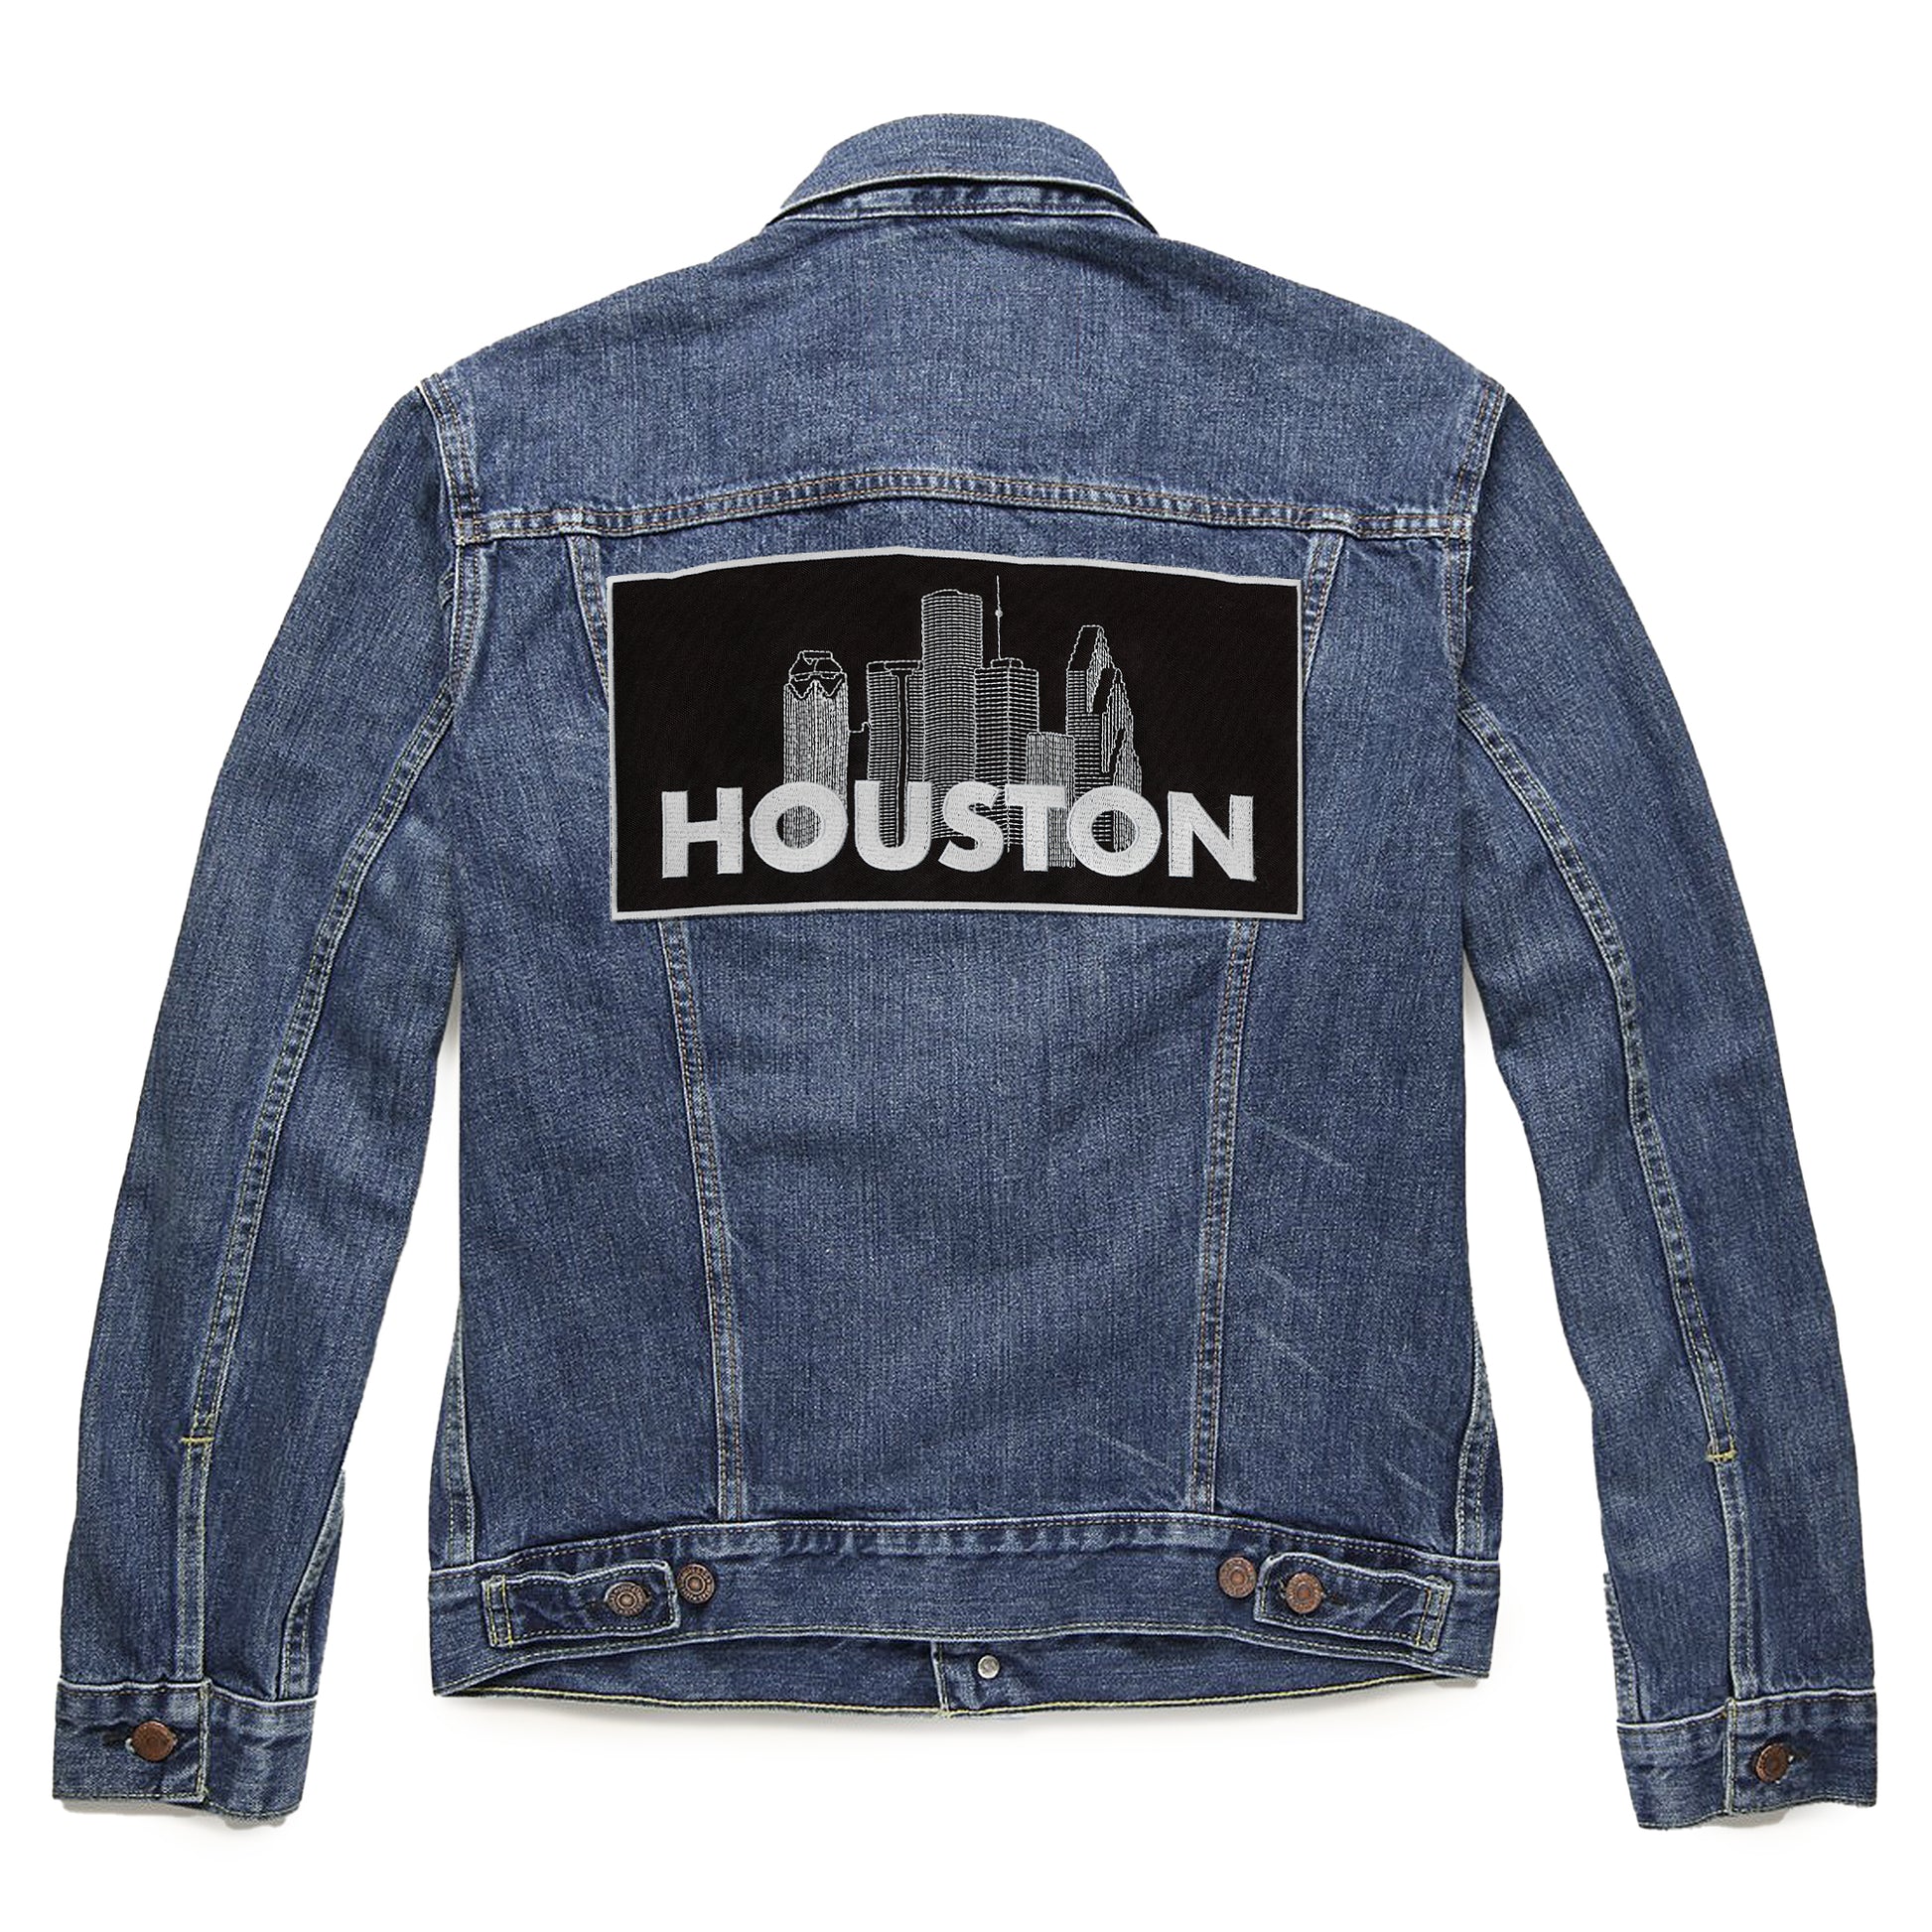 Houston City Skyline Patch Downtown X-Large Embroidered Iron On 